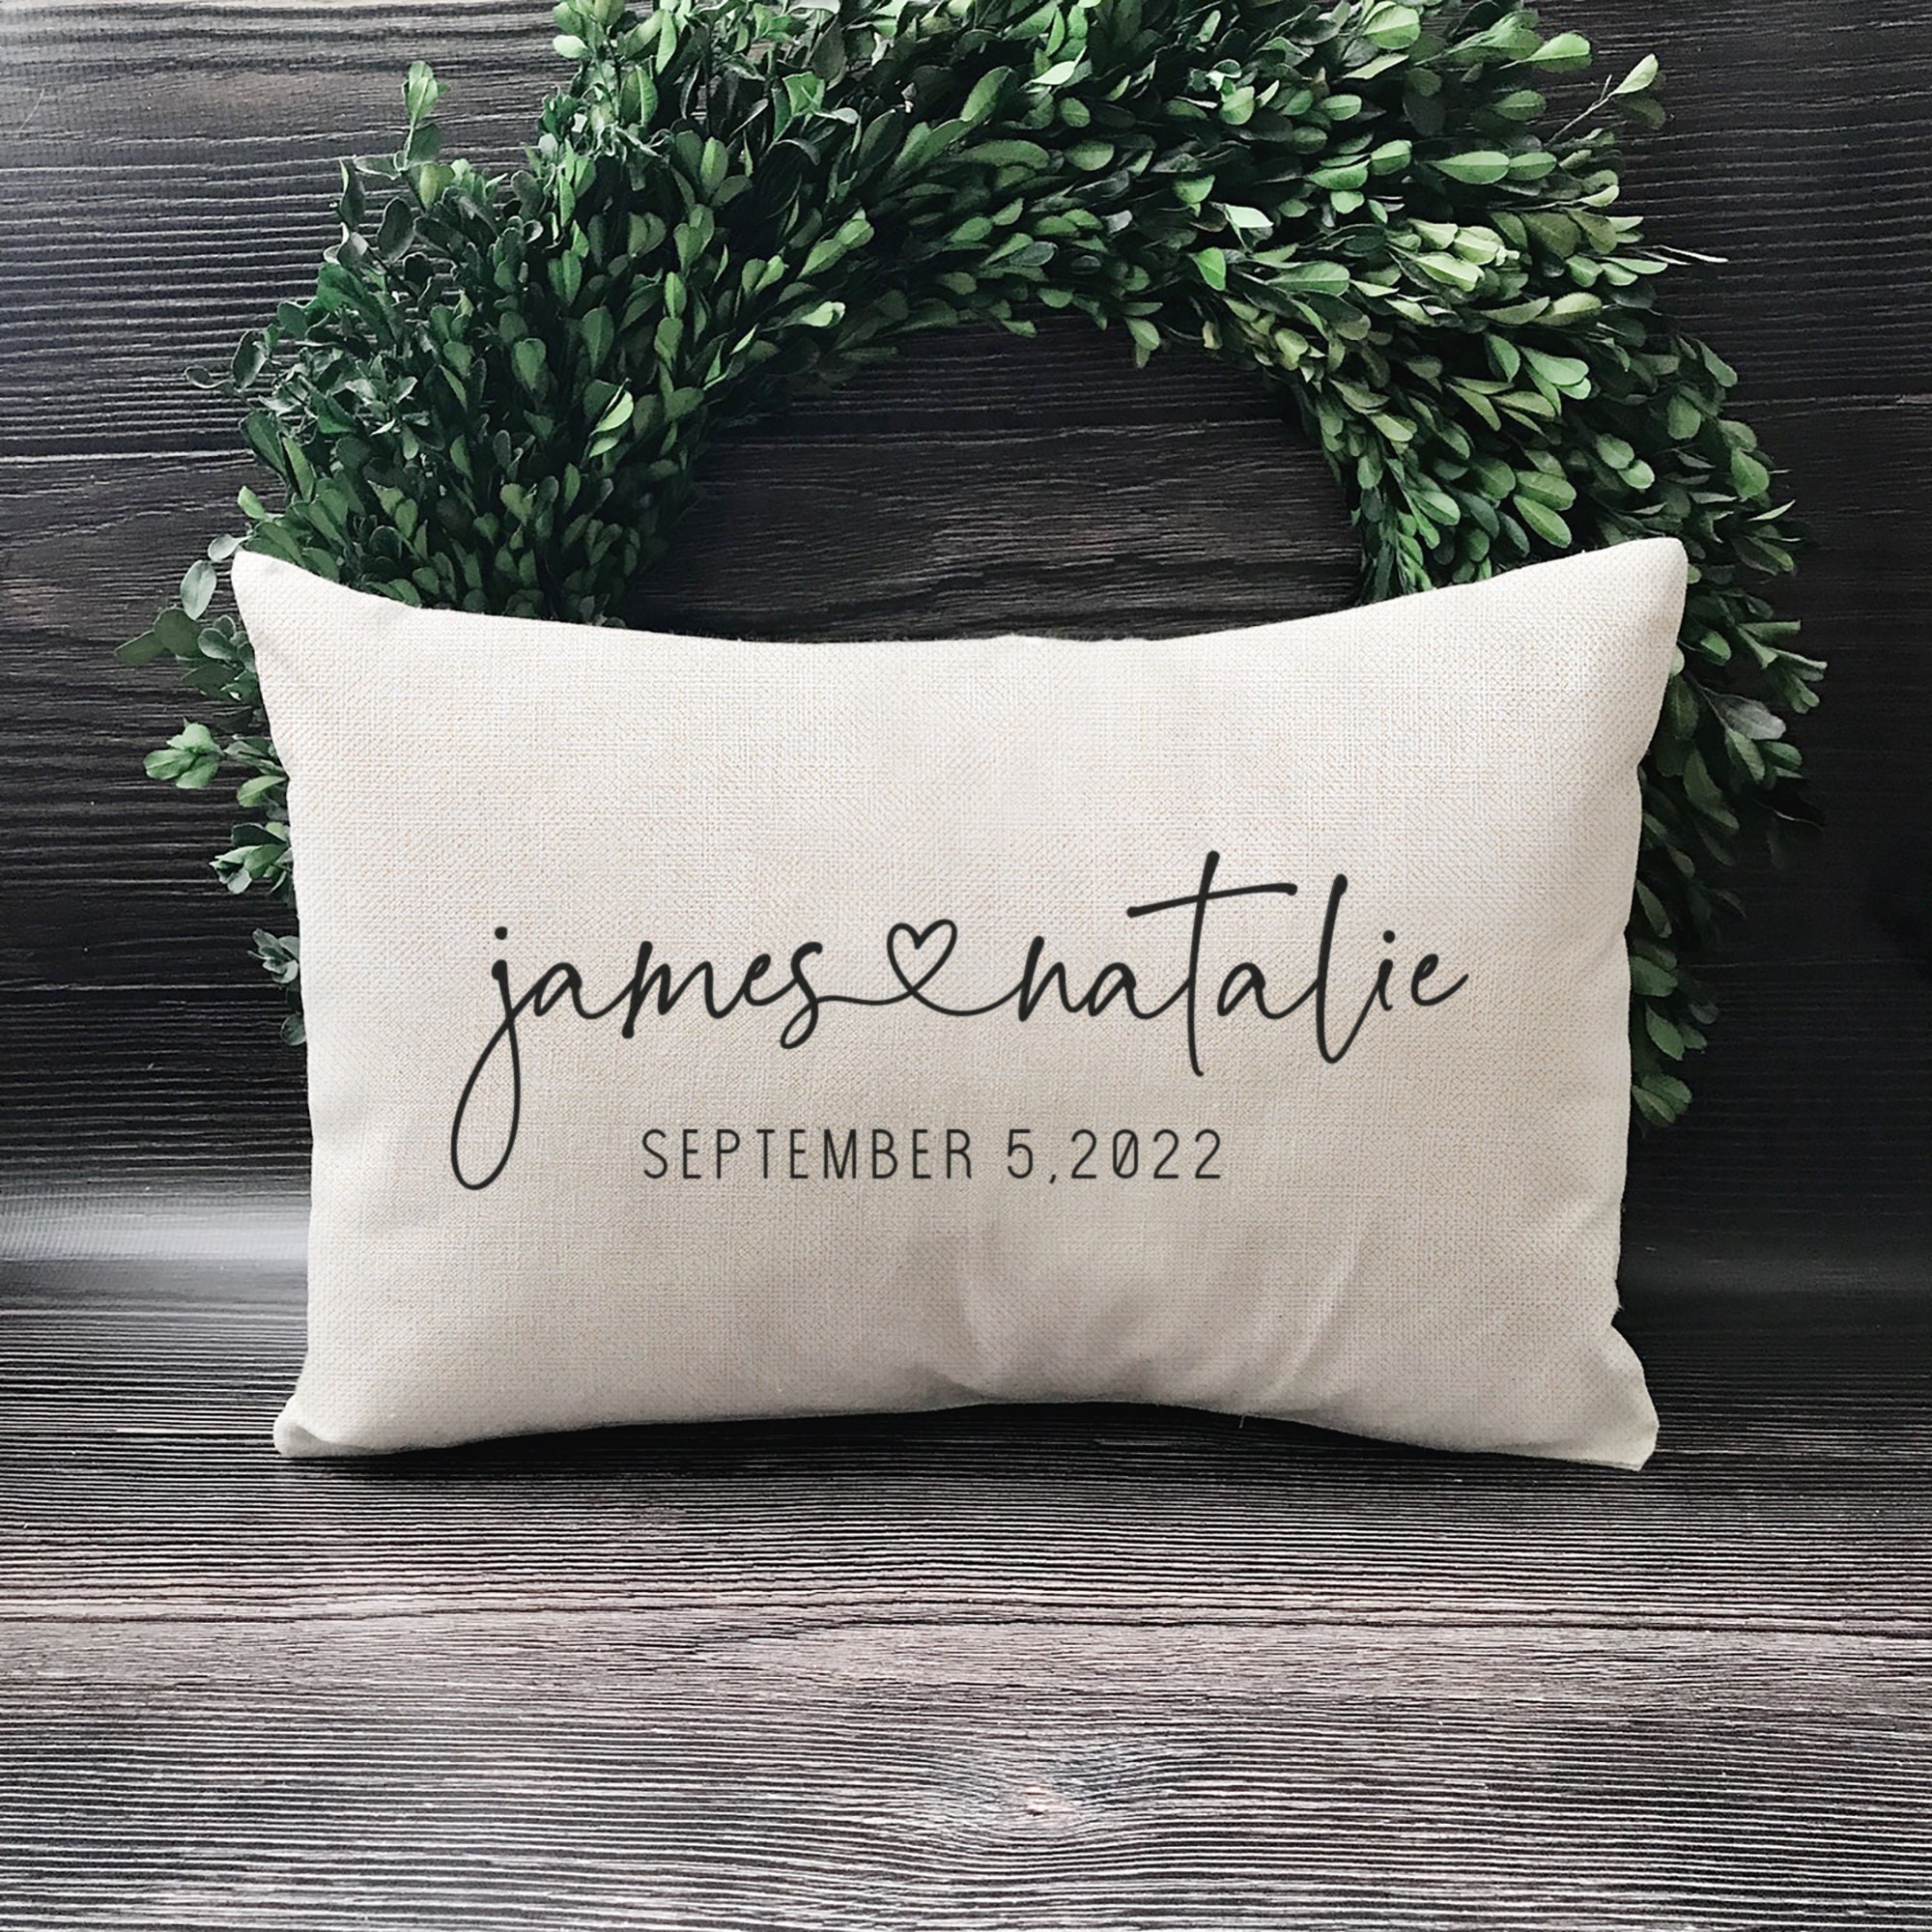 Together Since Husband Wife - Couple Gift - Personalized Custom Pillow